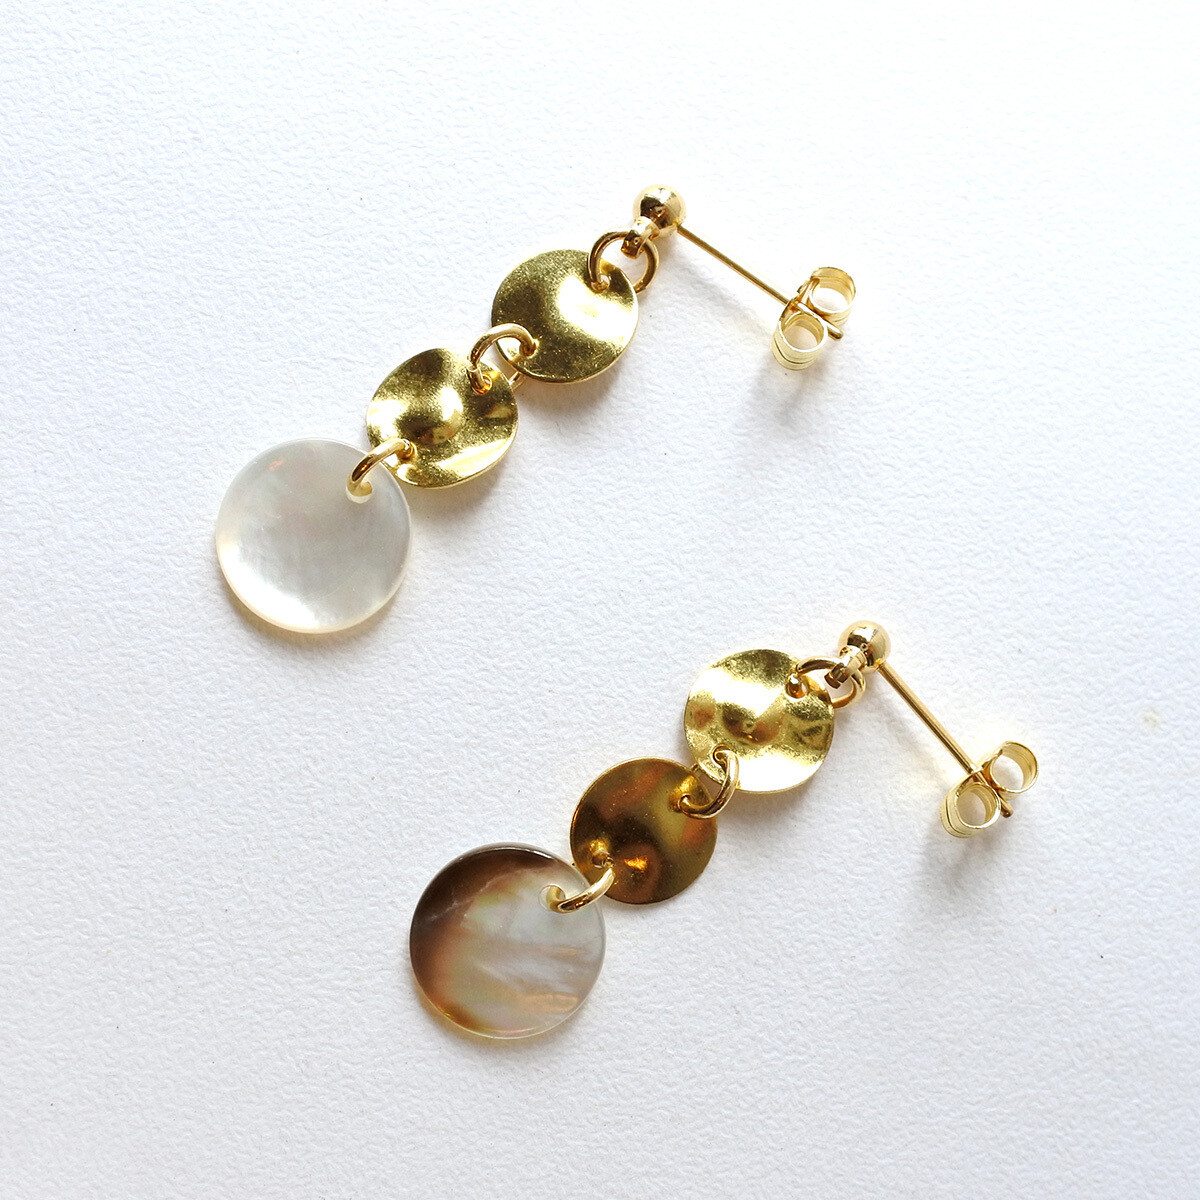 Tiny shell earrings — smart casual, style, accessories